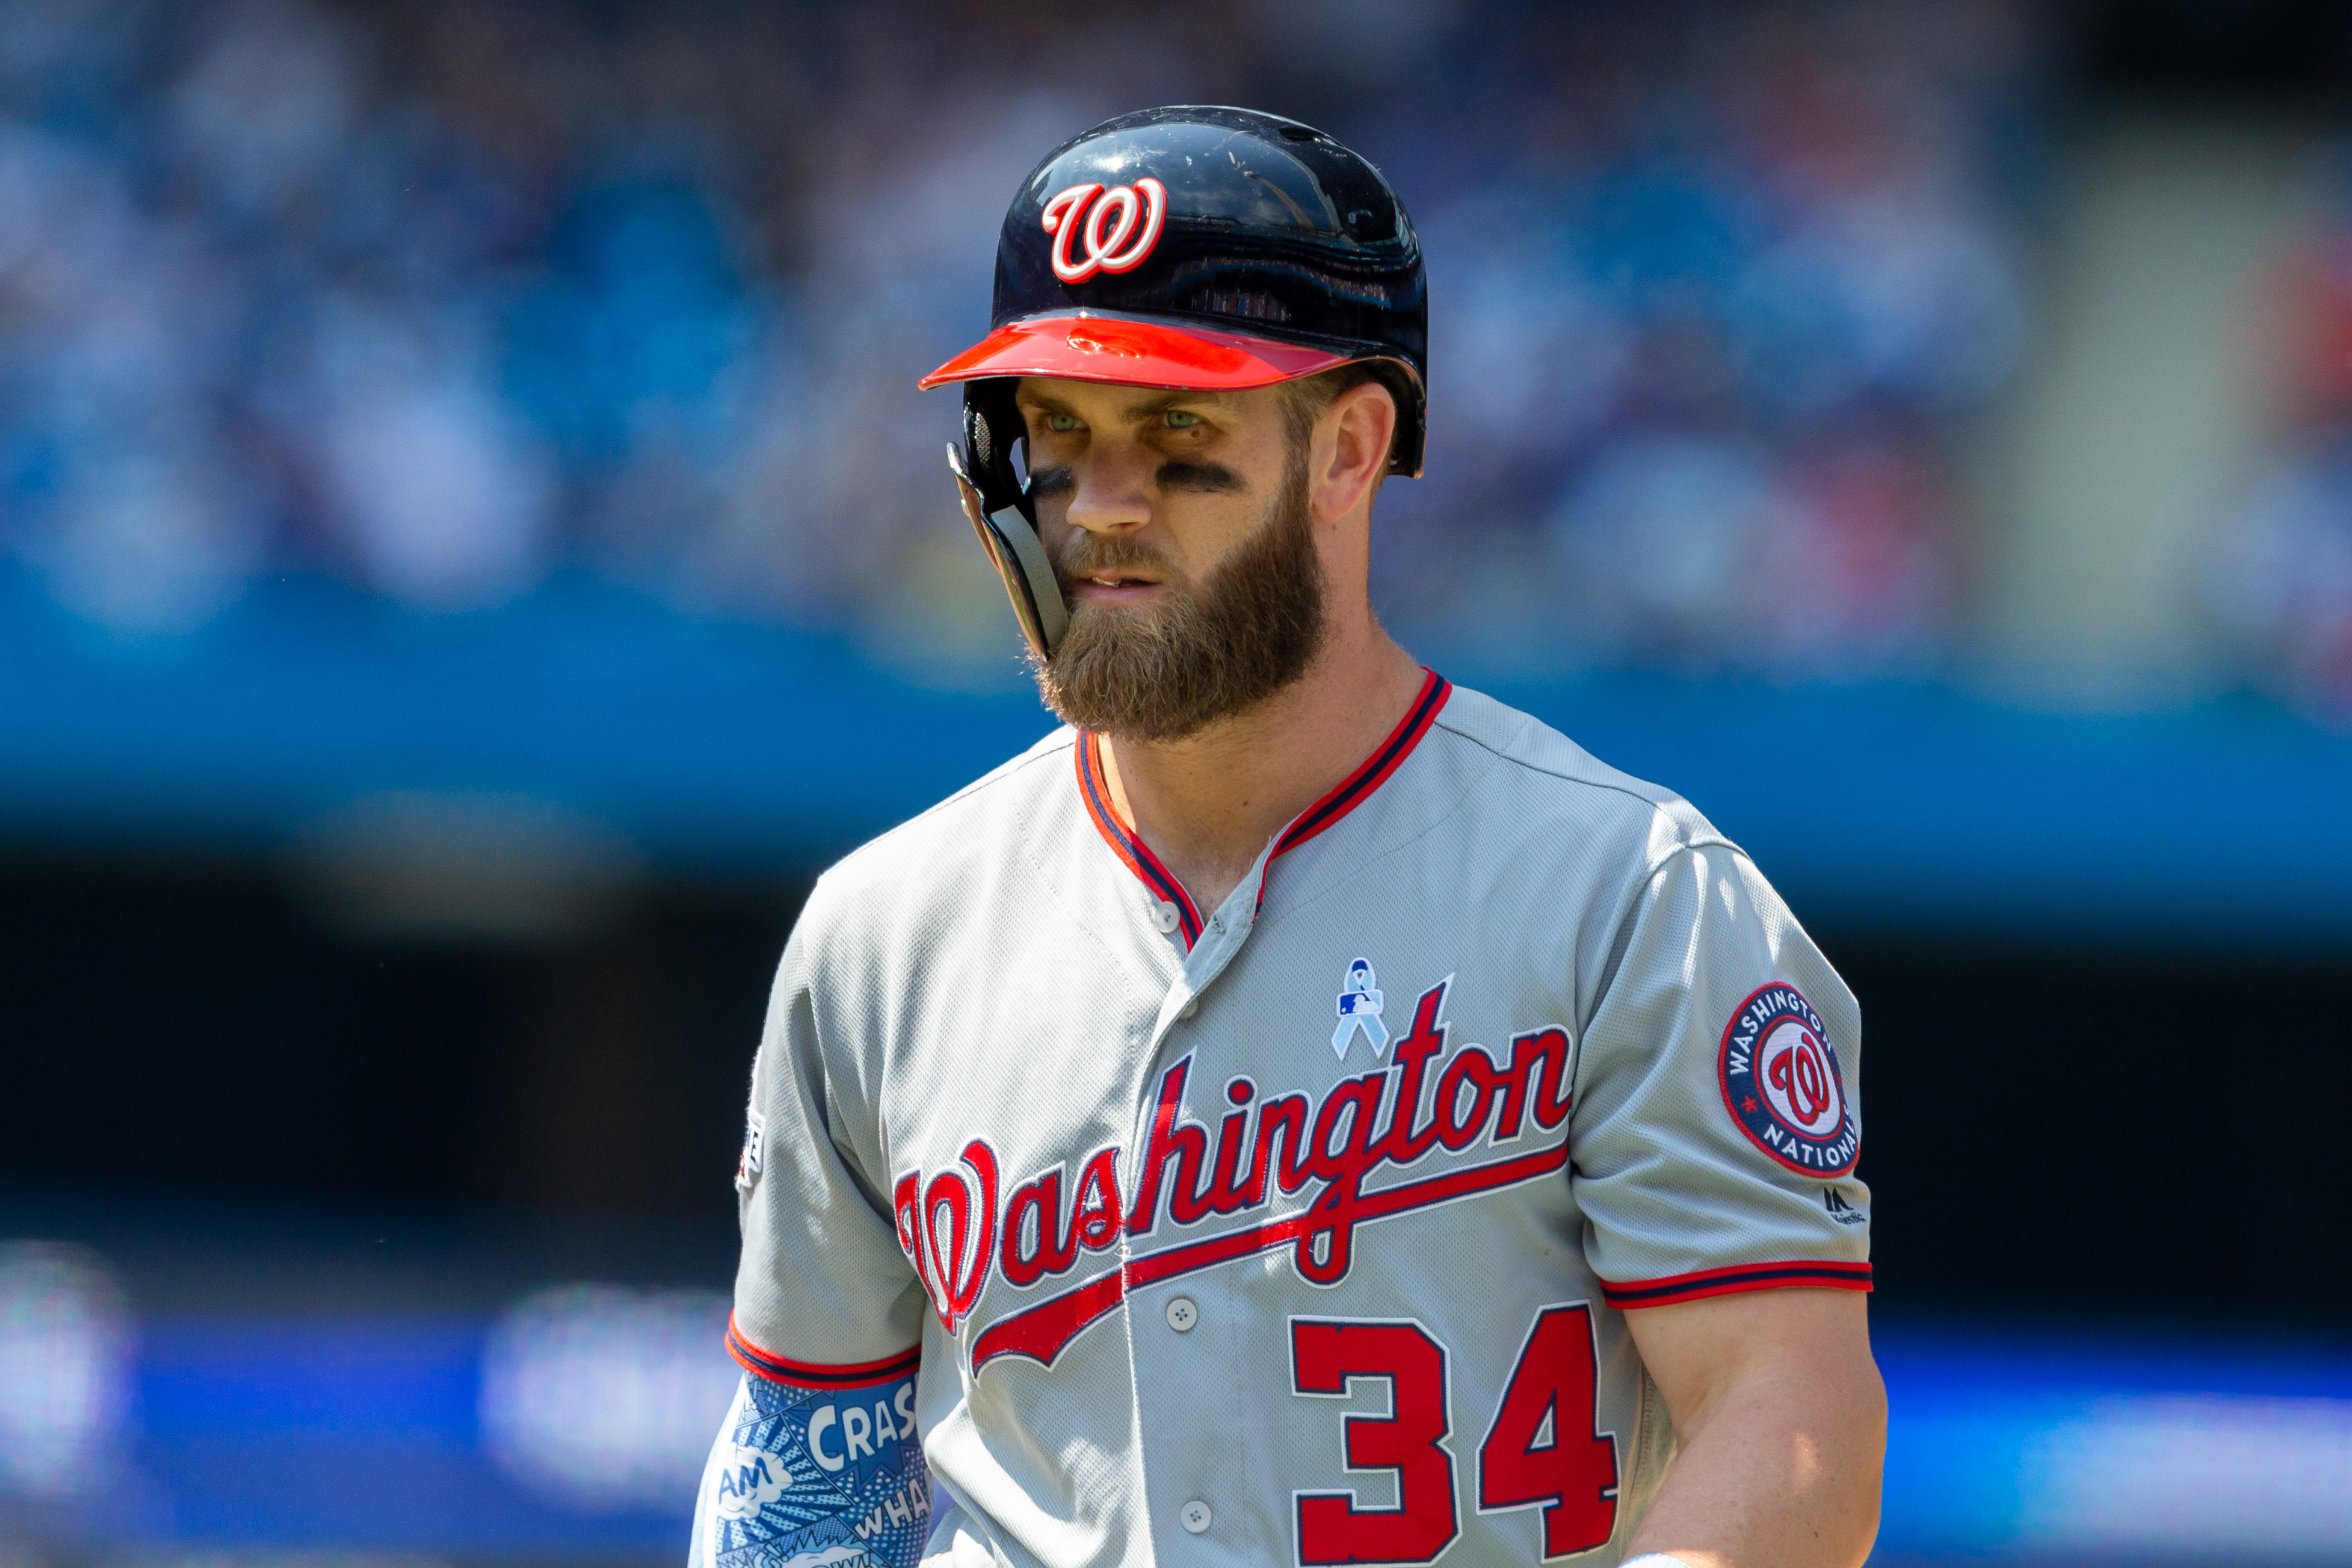 Bryce Harper looks like a different person after shaving his beard